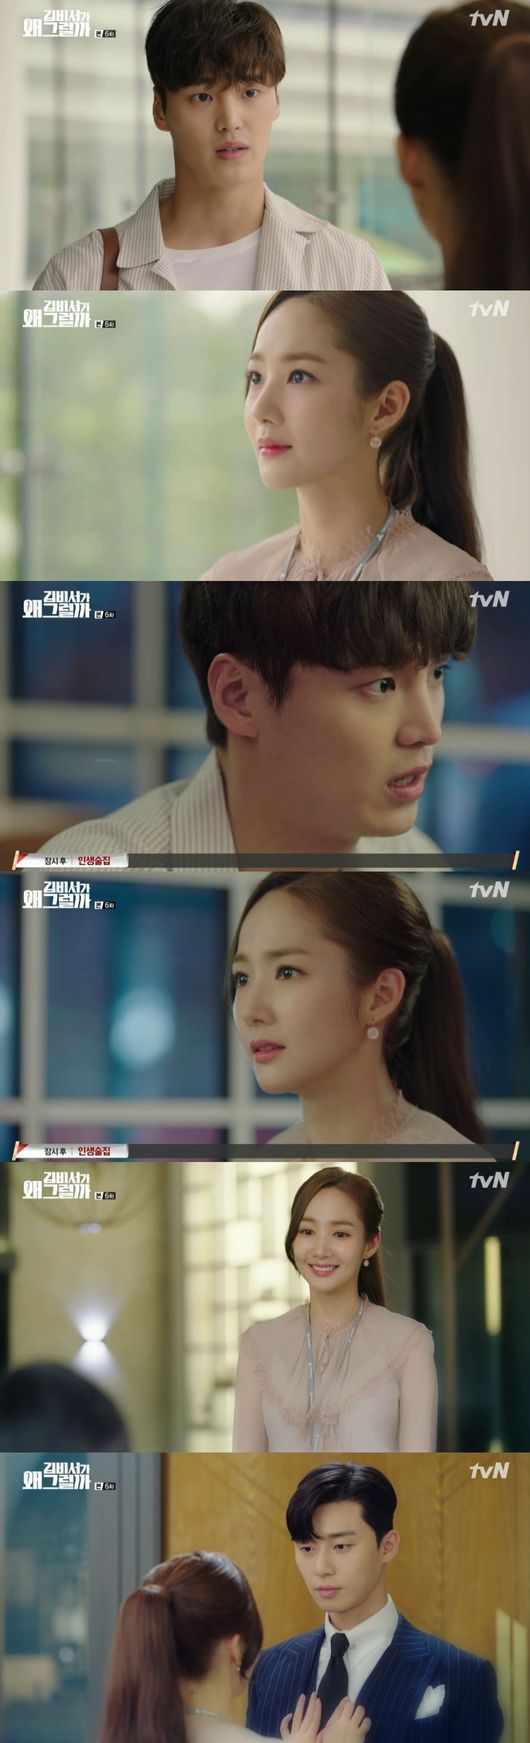 Lee Tae-hwan is expected to become a villa that blocks the love of Park Seo-joon and Park Min-young.In the 6th episode of the drama Why is Secretary Kim doing that (played by Baek Sun-woo, Choi Bo-rim, directed by Park Joon-hwa), which was broadcast on the afternoon of the 21st, questions were raised about Lee Sung-yeons actions.This is the memory of the role of the brother that Kim Mi-so was looking for, not the character of Park Seo-joon.Smile had a past where he was trapped in a house when he was a child. While he was looking for his brother who was trapped together, he assumed that Young Jun, who he was performing, was the main character.The reason was that Young Jun was afraid of cable strings and had scars tied to something on his ankle.Its not a good thing, but it can be hurt, said the smile to Park Yoo-sik (Kang Ki-young). I am satisfied that I found a good brother.The smile became more and more confident as I got closer to Young Jun. I am going to do anything as much as the vice chairman has been a force for me.I am so glad to meet you again, and I am sorry to find out late. So Young-joon liked to think that smile was getting worse.However, Sung Yeon said, I do not have a good memory of being kidnapped. I have been in a bad relationship since I was a child.Then, in the fourth grade of elementary school, Young Jun was in the same class because he was overthrown. He made my friends on his side with his smart head, and he took sides with them and bothered me.One day, Young Jun took him to the redevelopment area, and he was abducted while waiting for Young Jun. This was a completely contrary claim to what Young Jun had said.Young-joon said that he was bullied by the friends of the sex, including the sex, and the smile was confused.The brother in his memory clearly introduced it as Lee Sung Yeon.While one of them is lying, viewers who smiled at the romance of smile and Young Jun are suspicious of the words of the castle.Sung-yeon is a best-selling author and is working under the pseudonym Morpheus. Although there is a past that has been suffering from complexions compared to Young-joon, he is now armed with a friendly face.He is showing a favorable feeling to the smile that is close to Young Jun.The sincerity of the castle is curious whether it is a lie of the castle to separate between Young Jun and the smile, what is the real face hidden behind the affection.Why would Secretary Kim do that? Capture the broadcast screen.